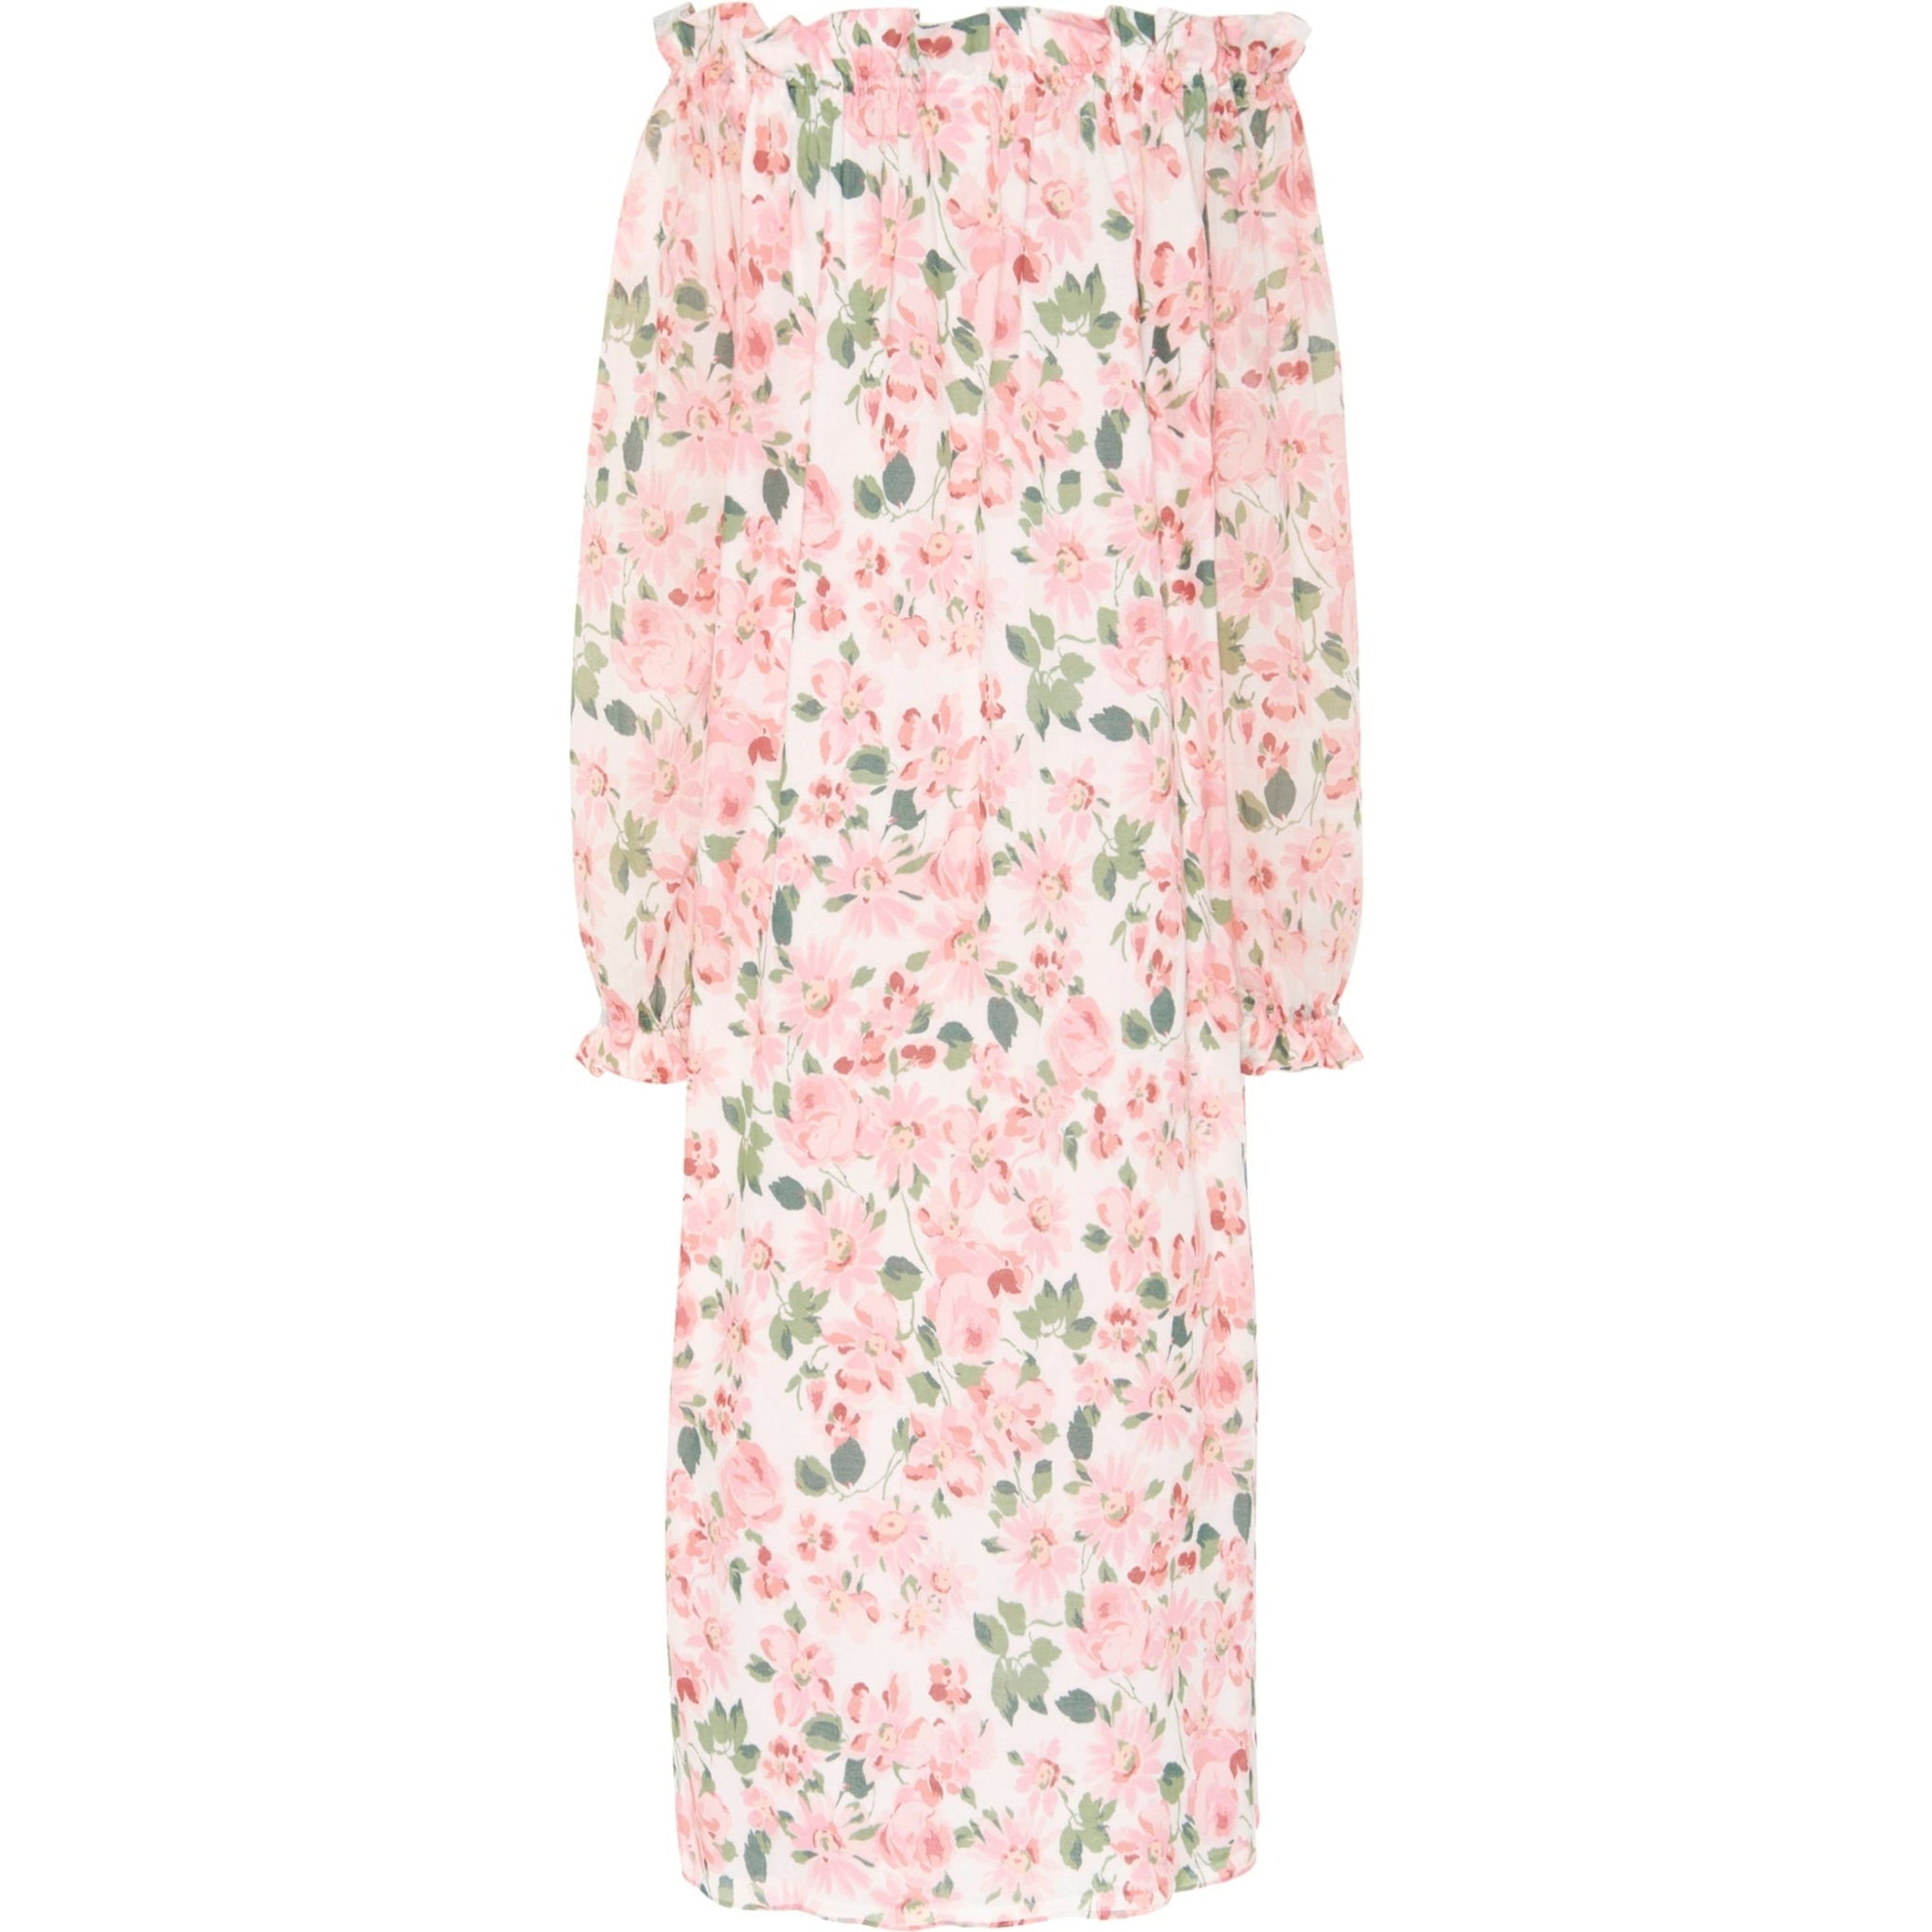 Women's Grace Dress in Pink Floral Cotton Voile - Casey Marks